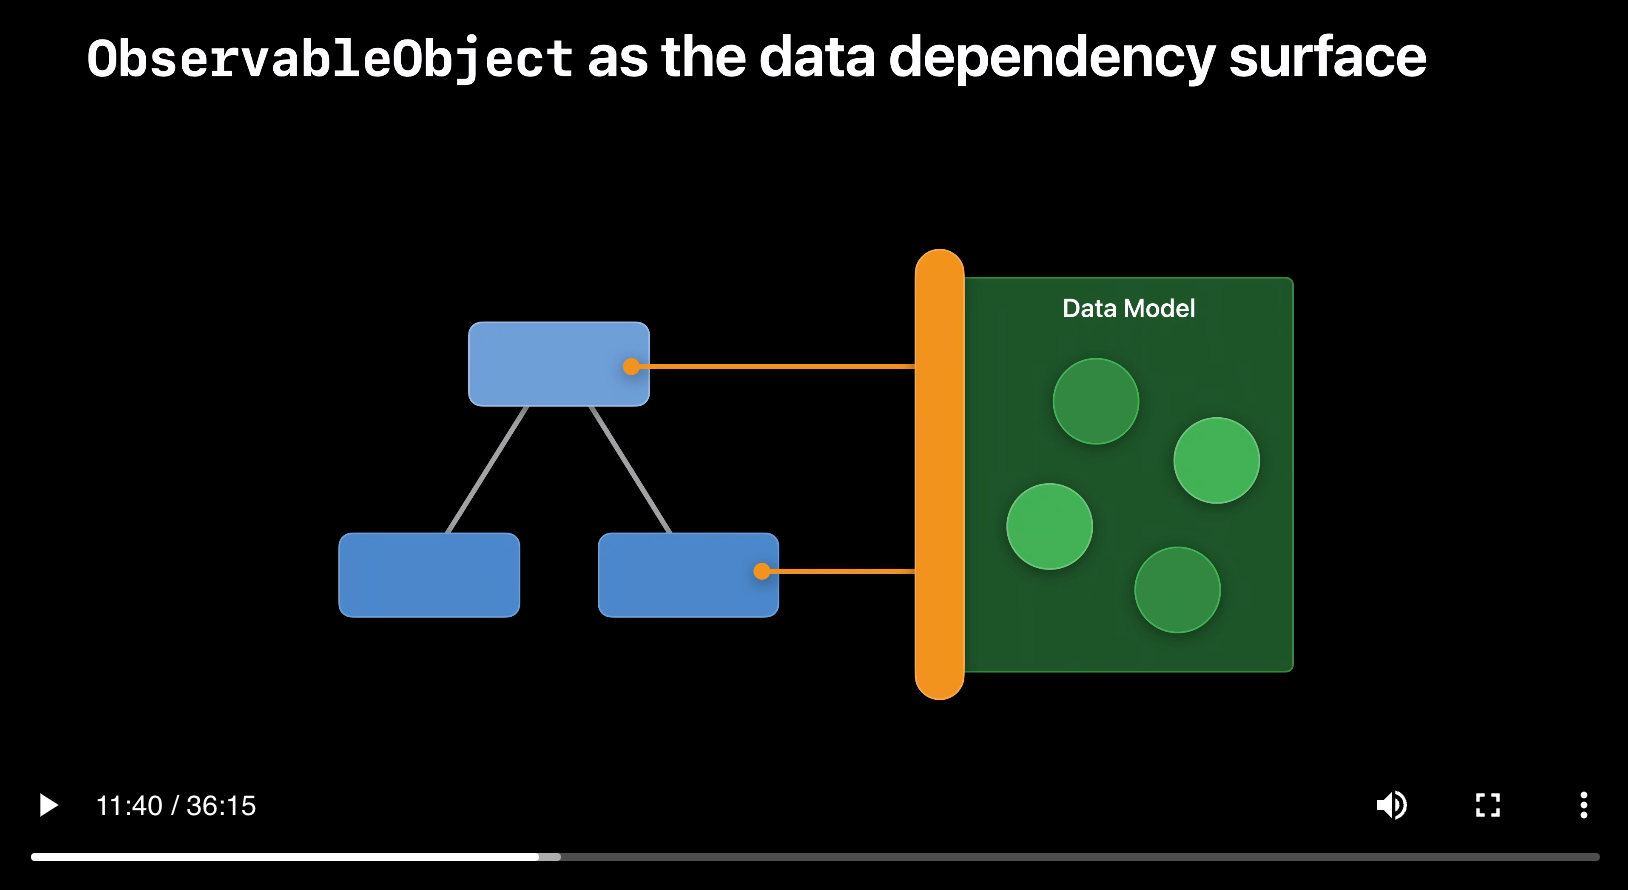 ObservableObject as the data dependency surface